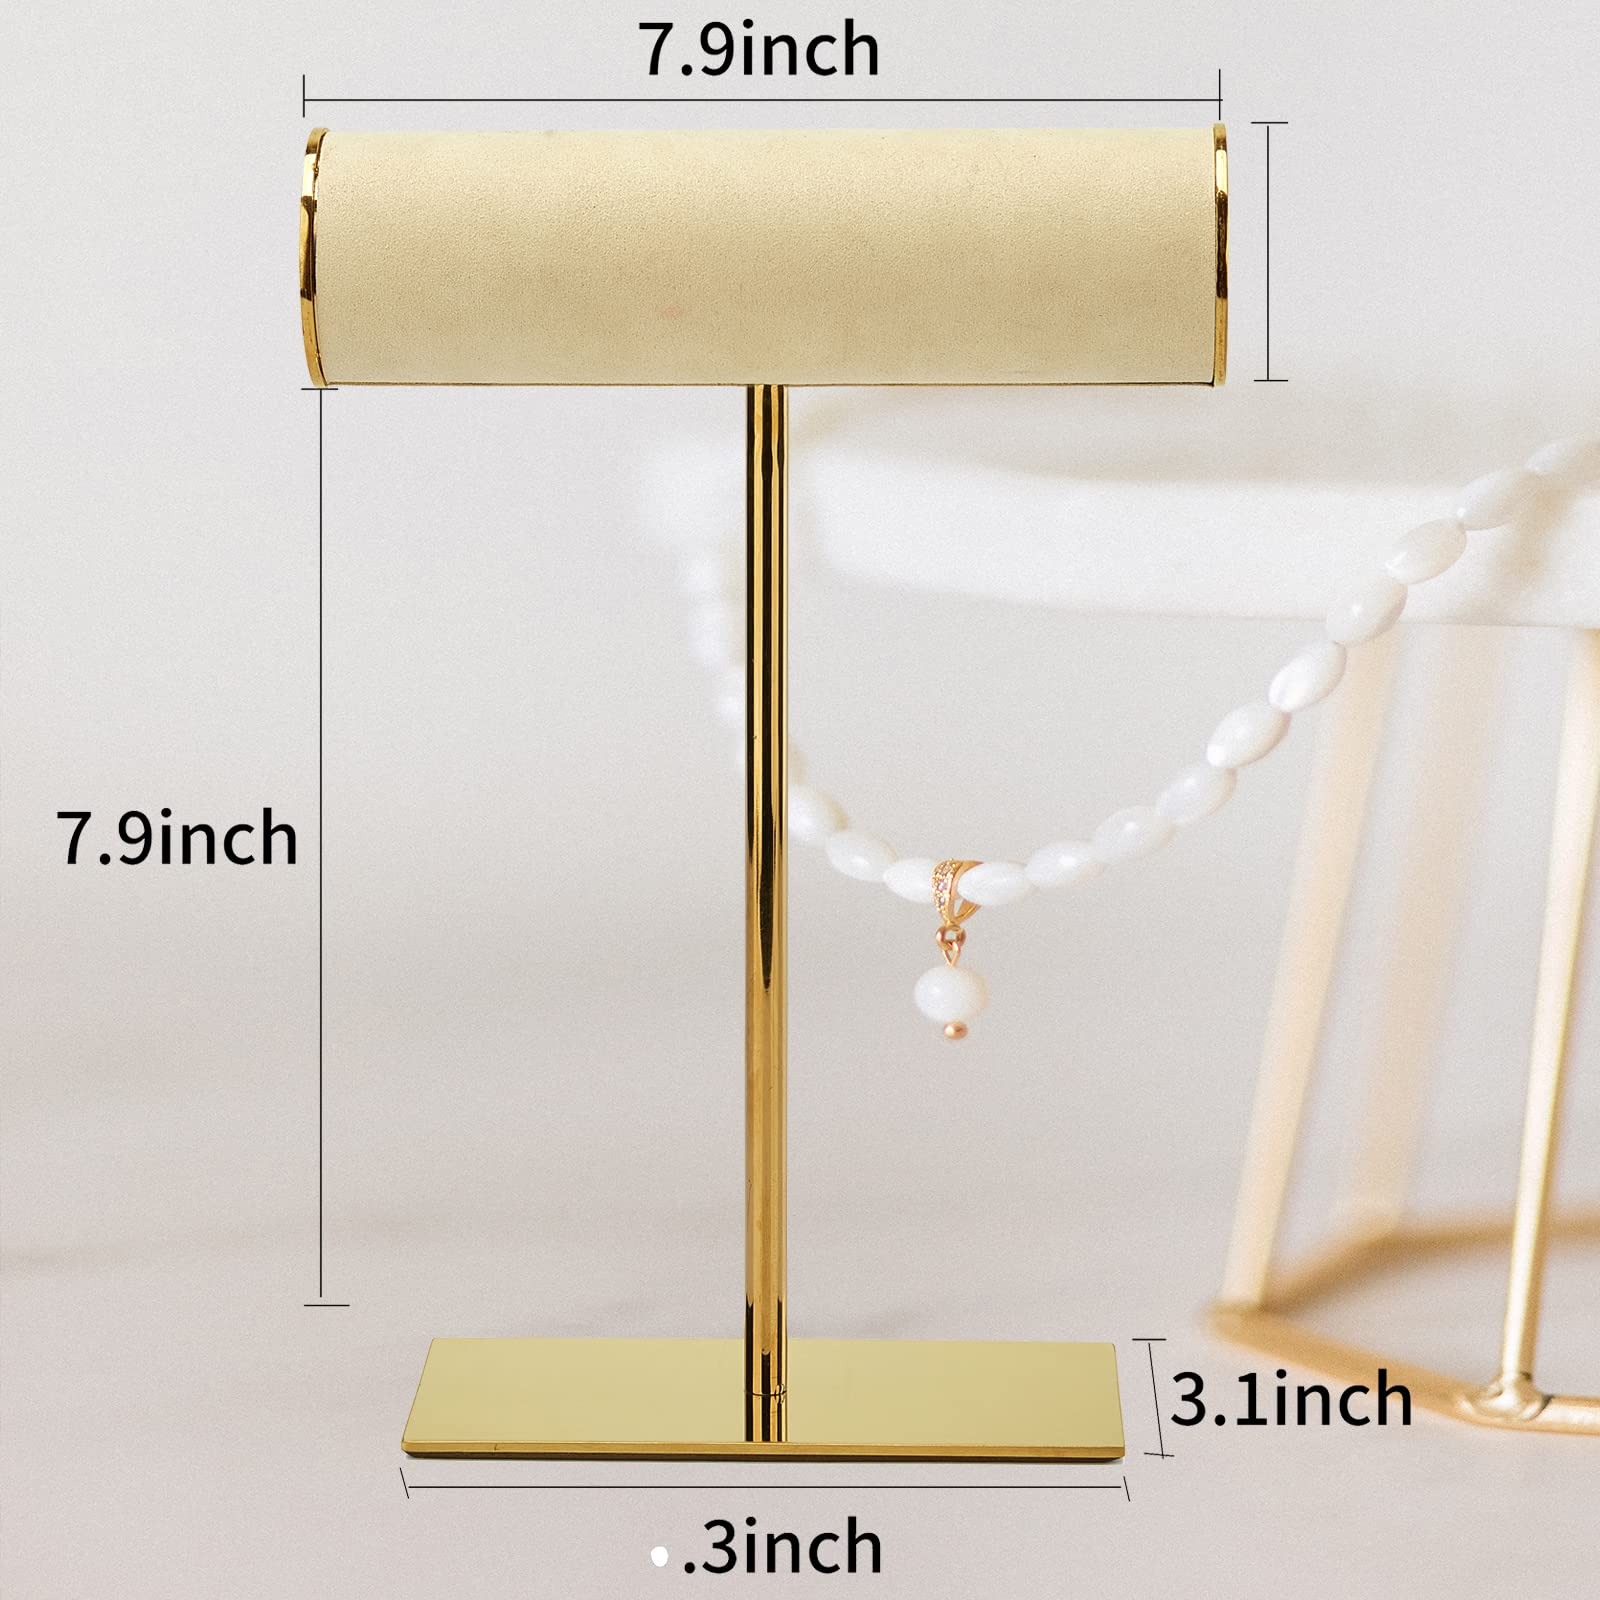 Watch Display Stand